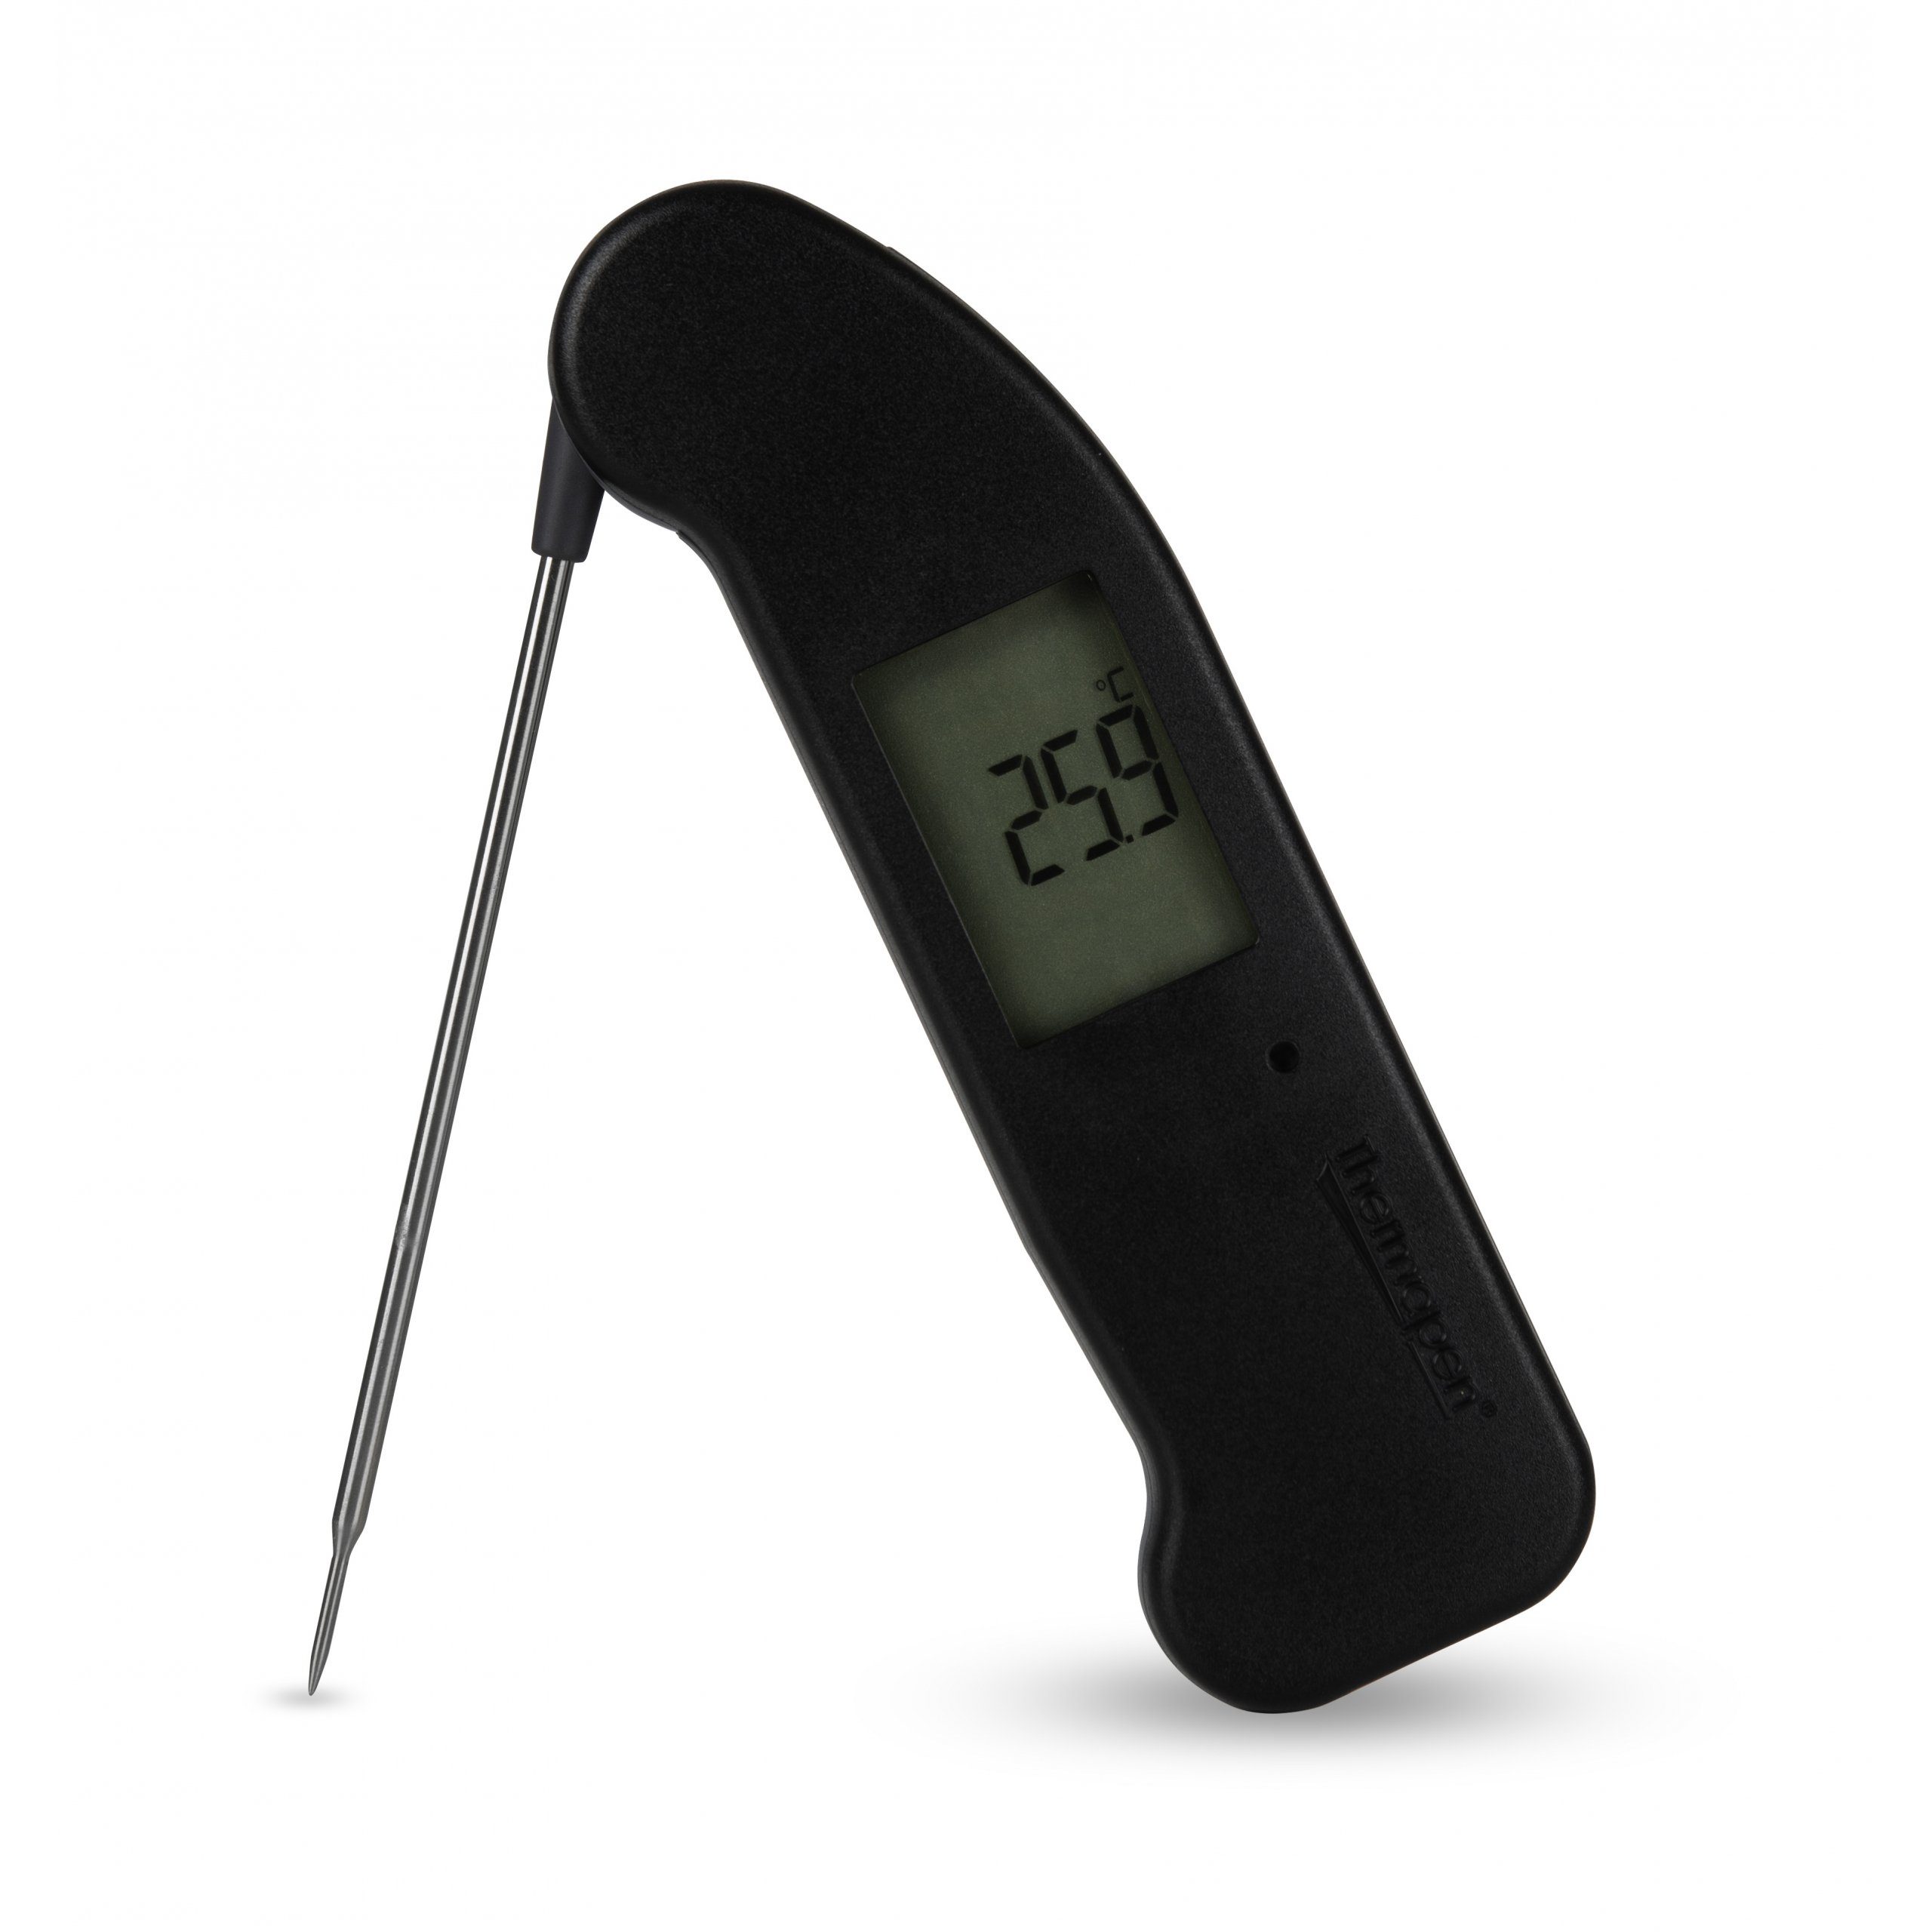 Rumo Barbeque Smoker Thermapen ONE Thermometer - Das Sekundenschnelle Grillthermometer